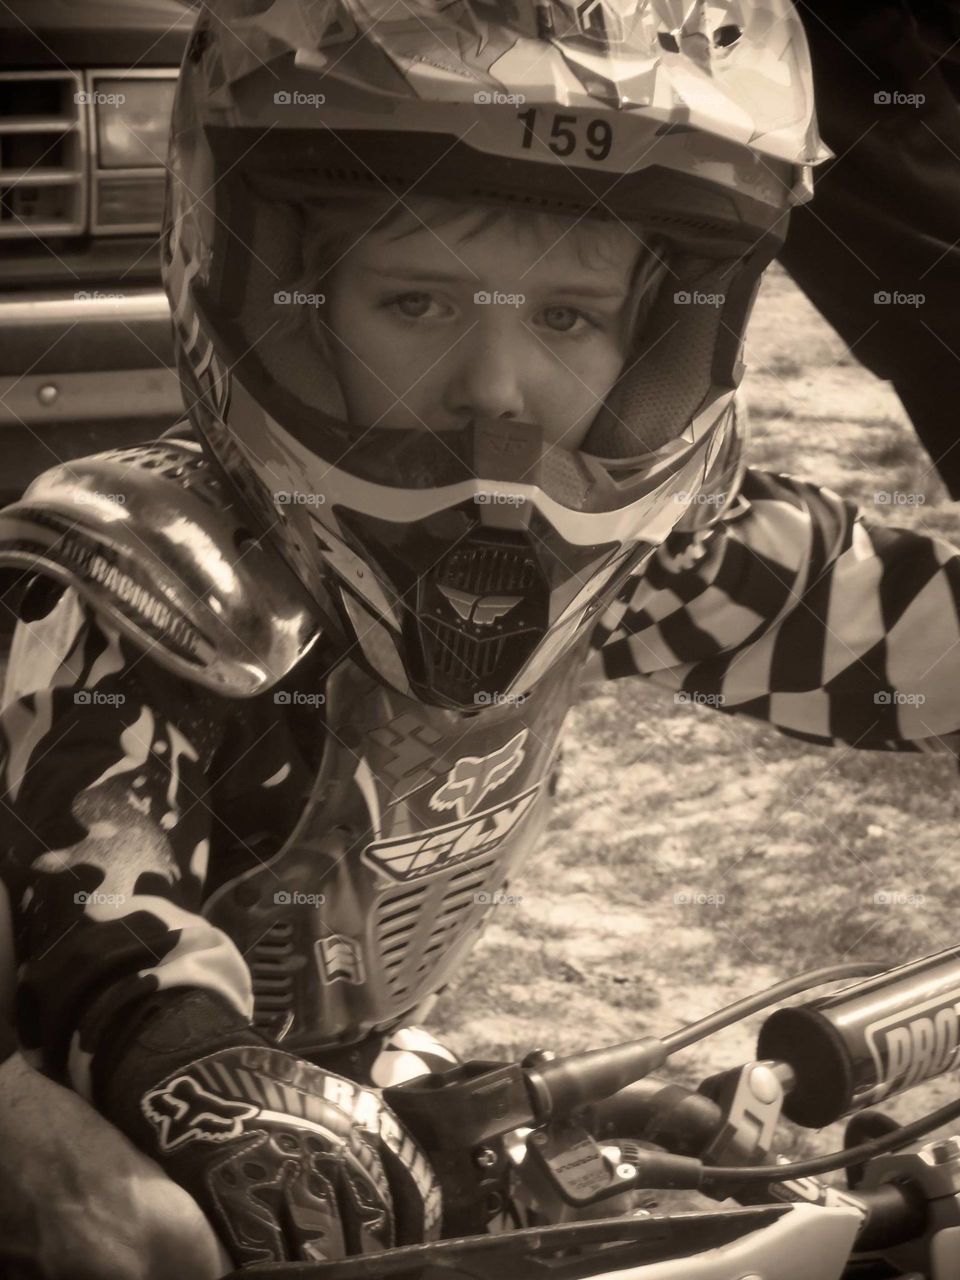 Its Mine. This is my 6 yr old, Ethan Jack, #159. He's been racing dirt bikes since age 2. This is what he calls his "race face." 